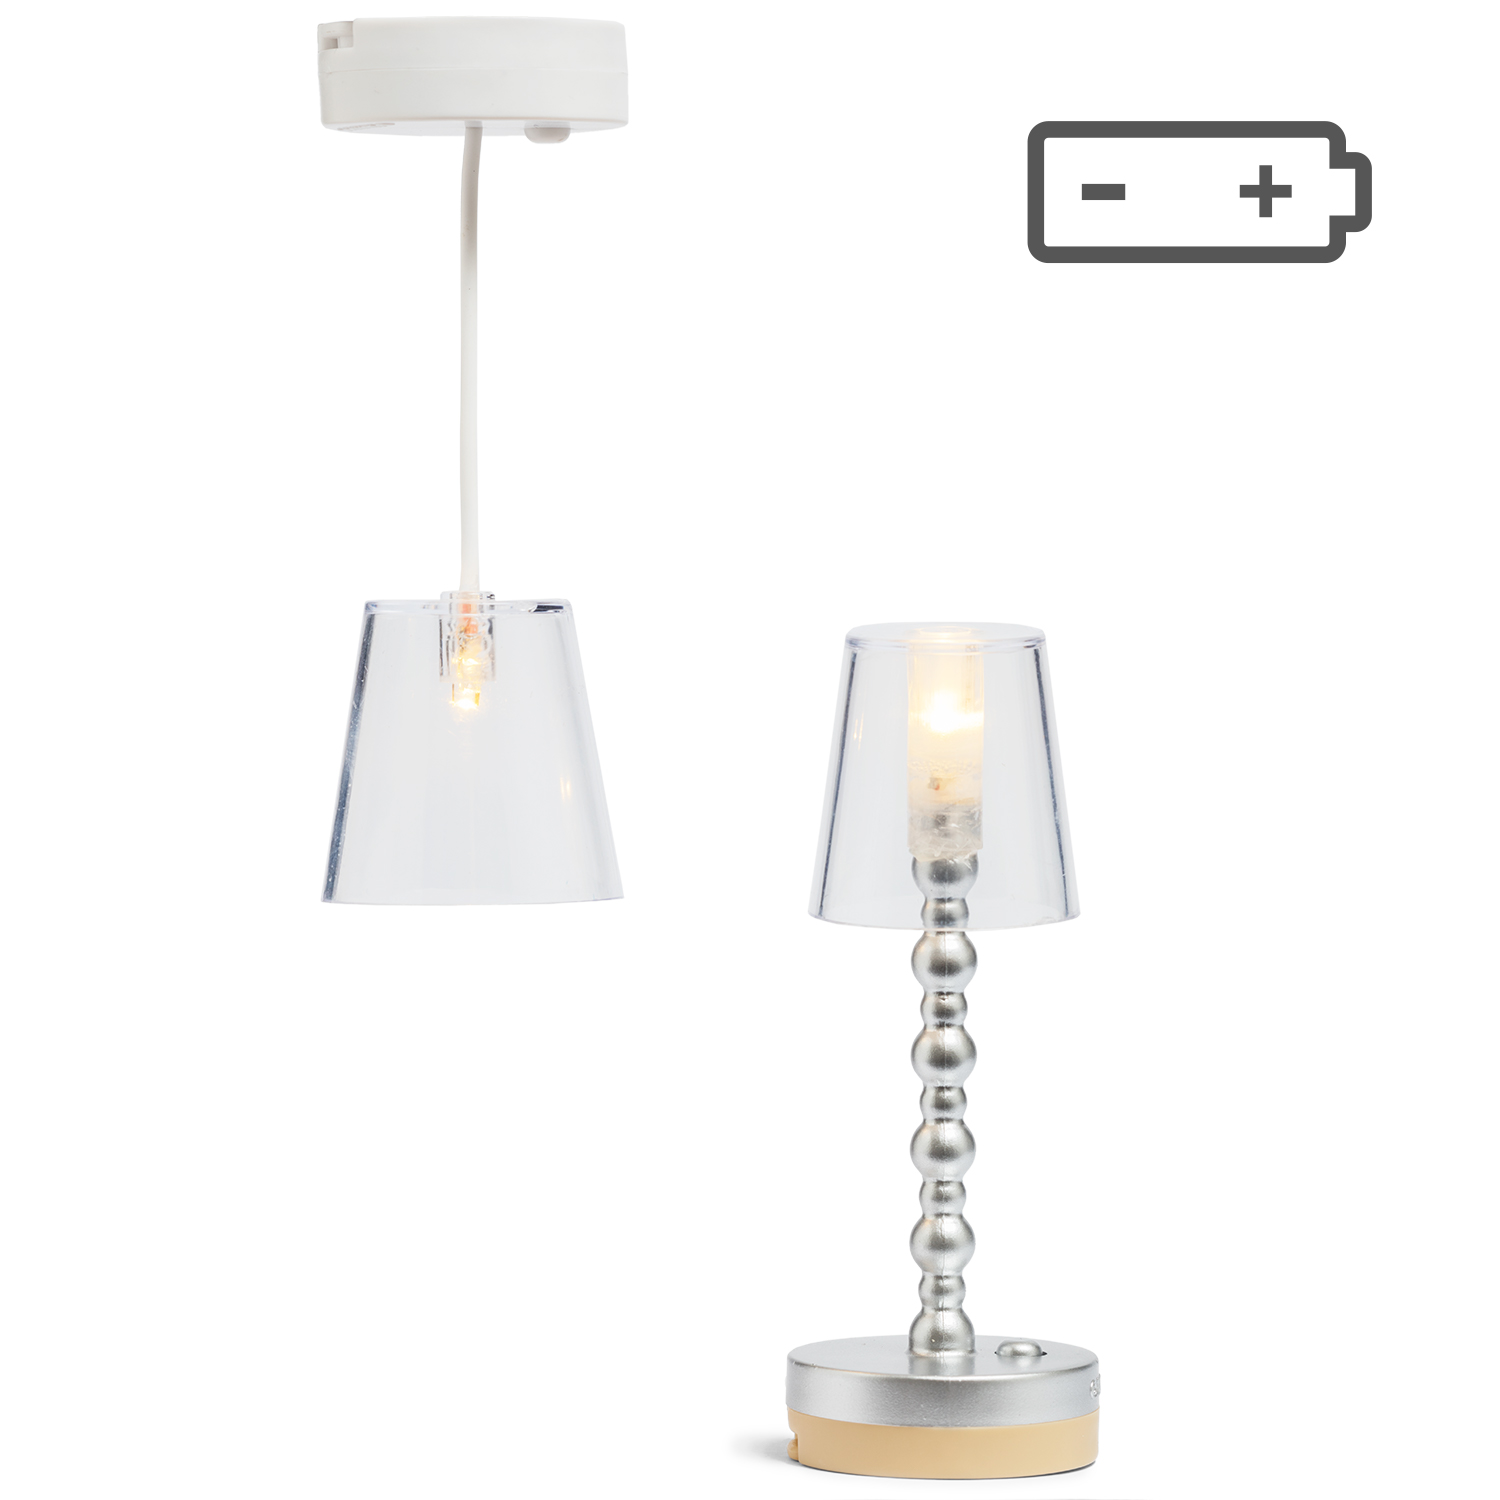 Lundby lundby doll house lighting floor & ceiling lamps